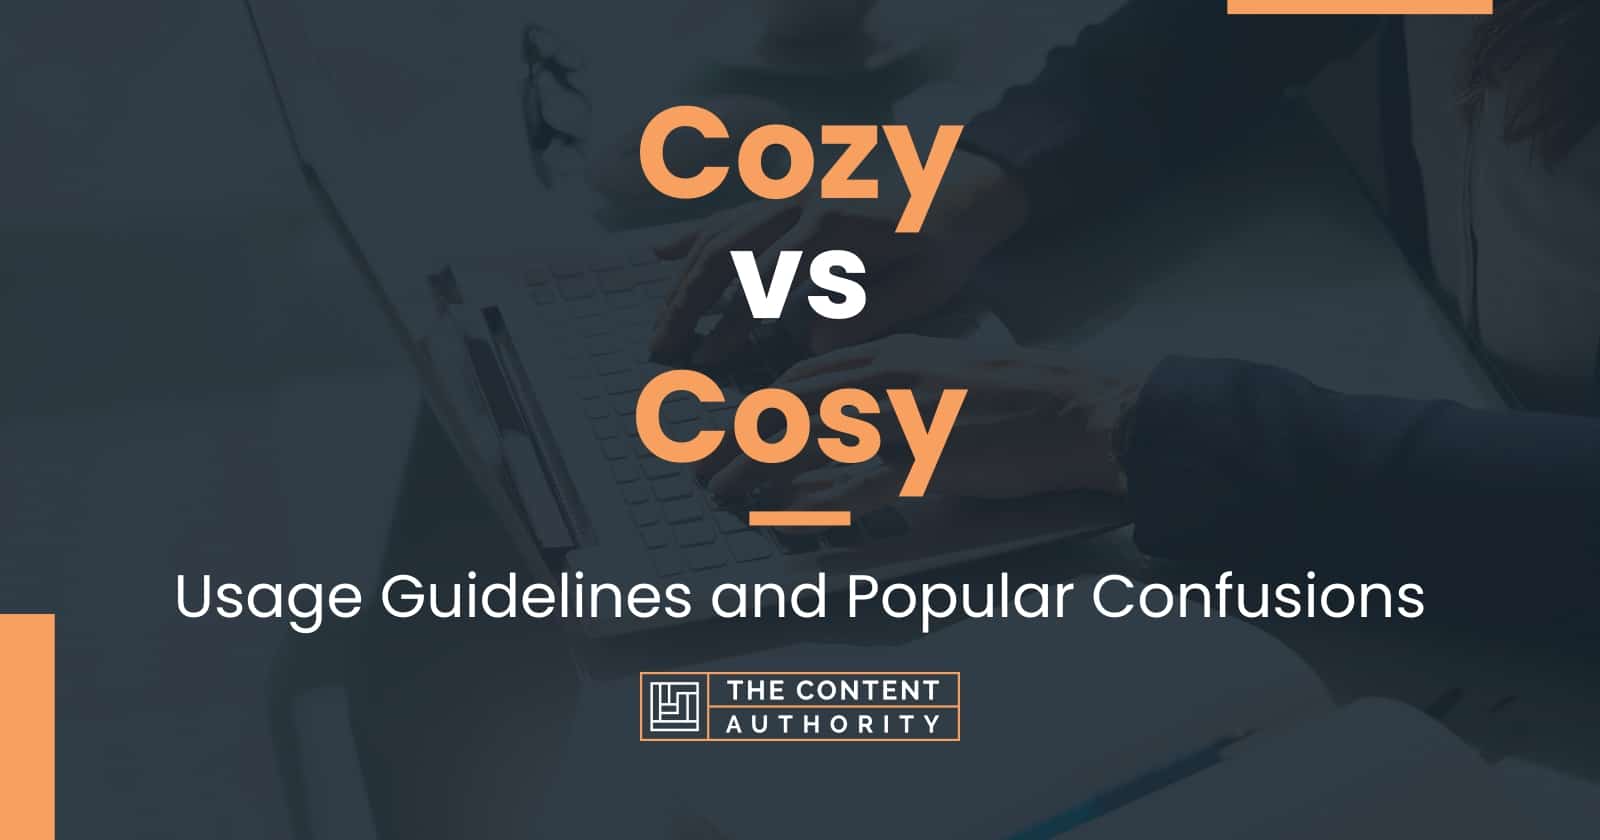 Cozy vs Cosy: Usage Guidelines and Popular Confusions